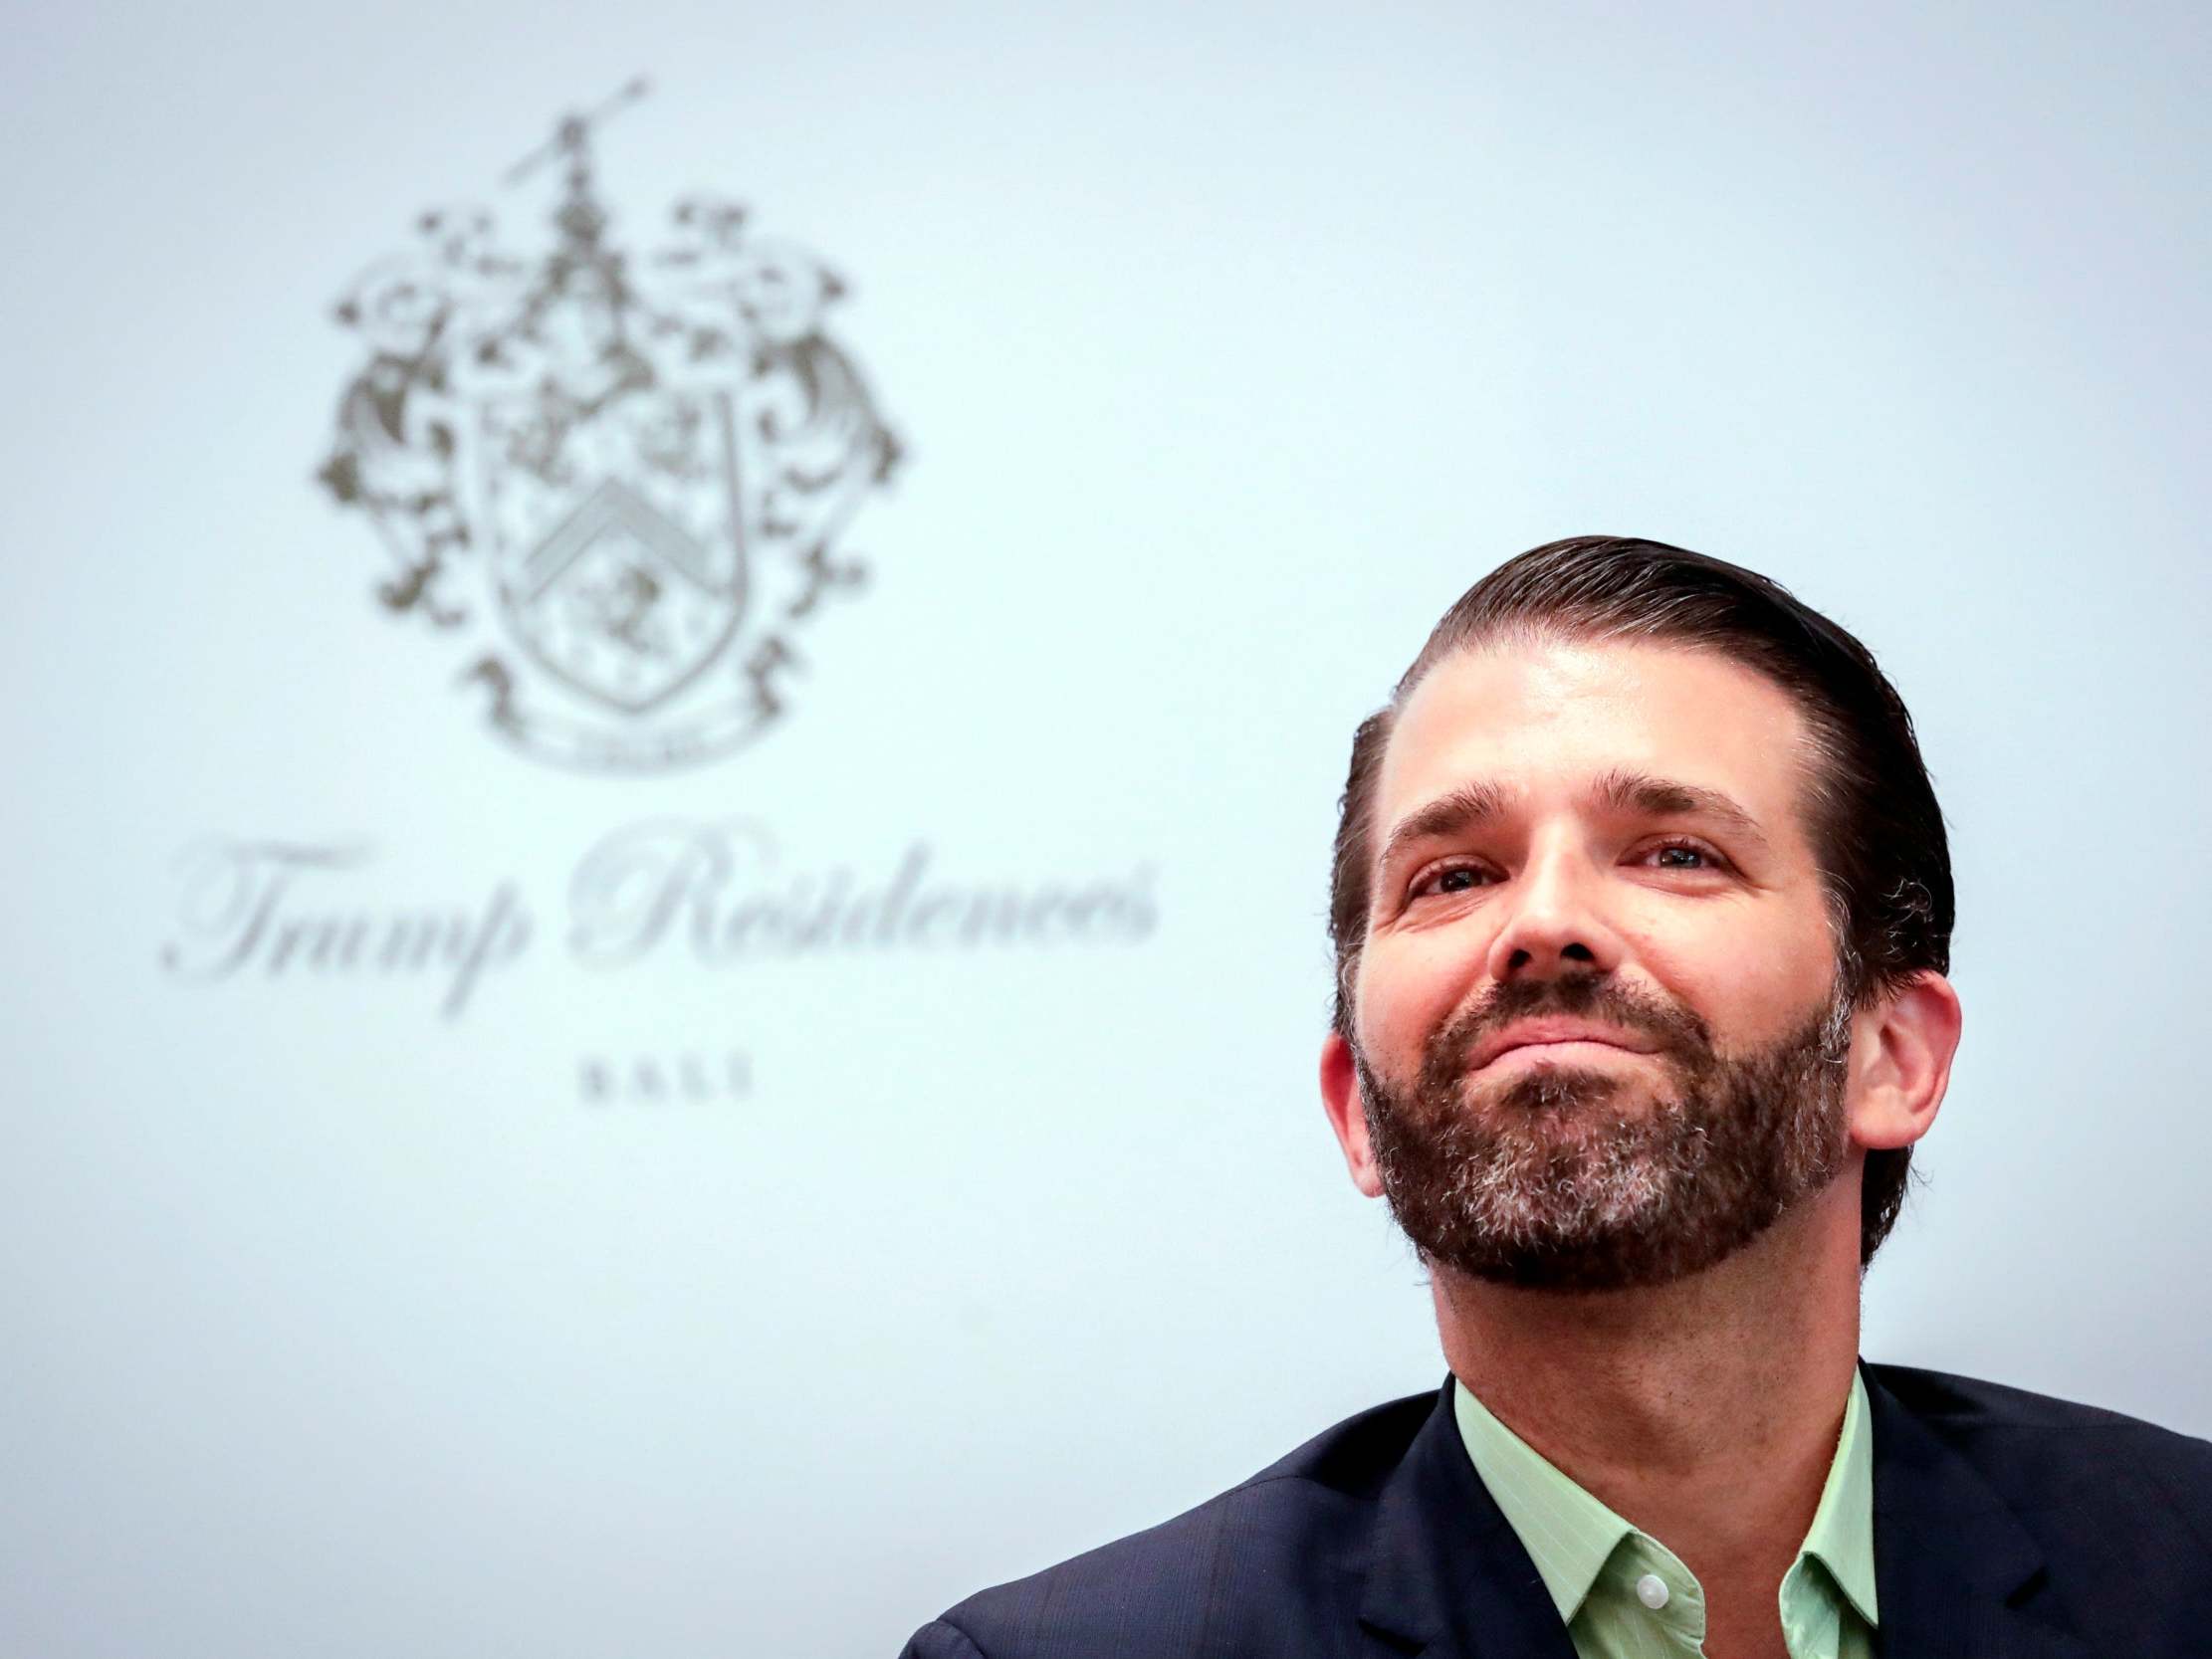 Donald Trump Jr., whose comments are used in new anti-Trump advert